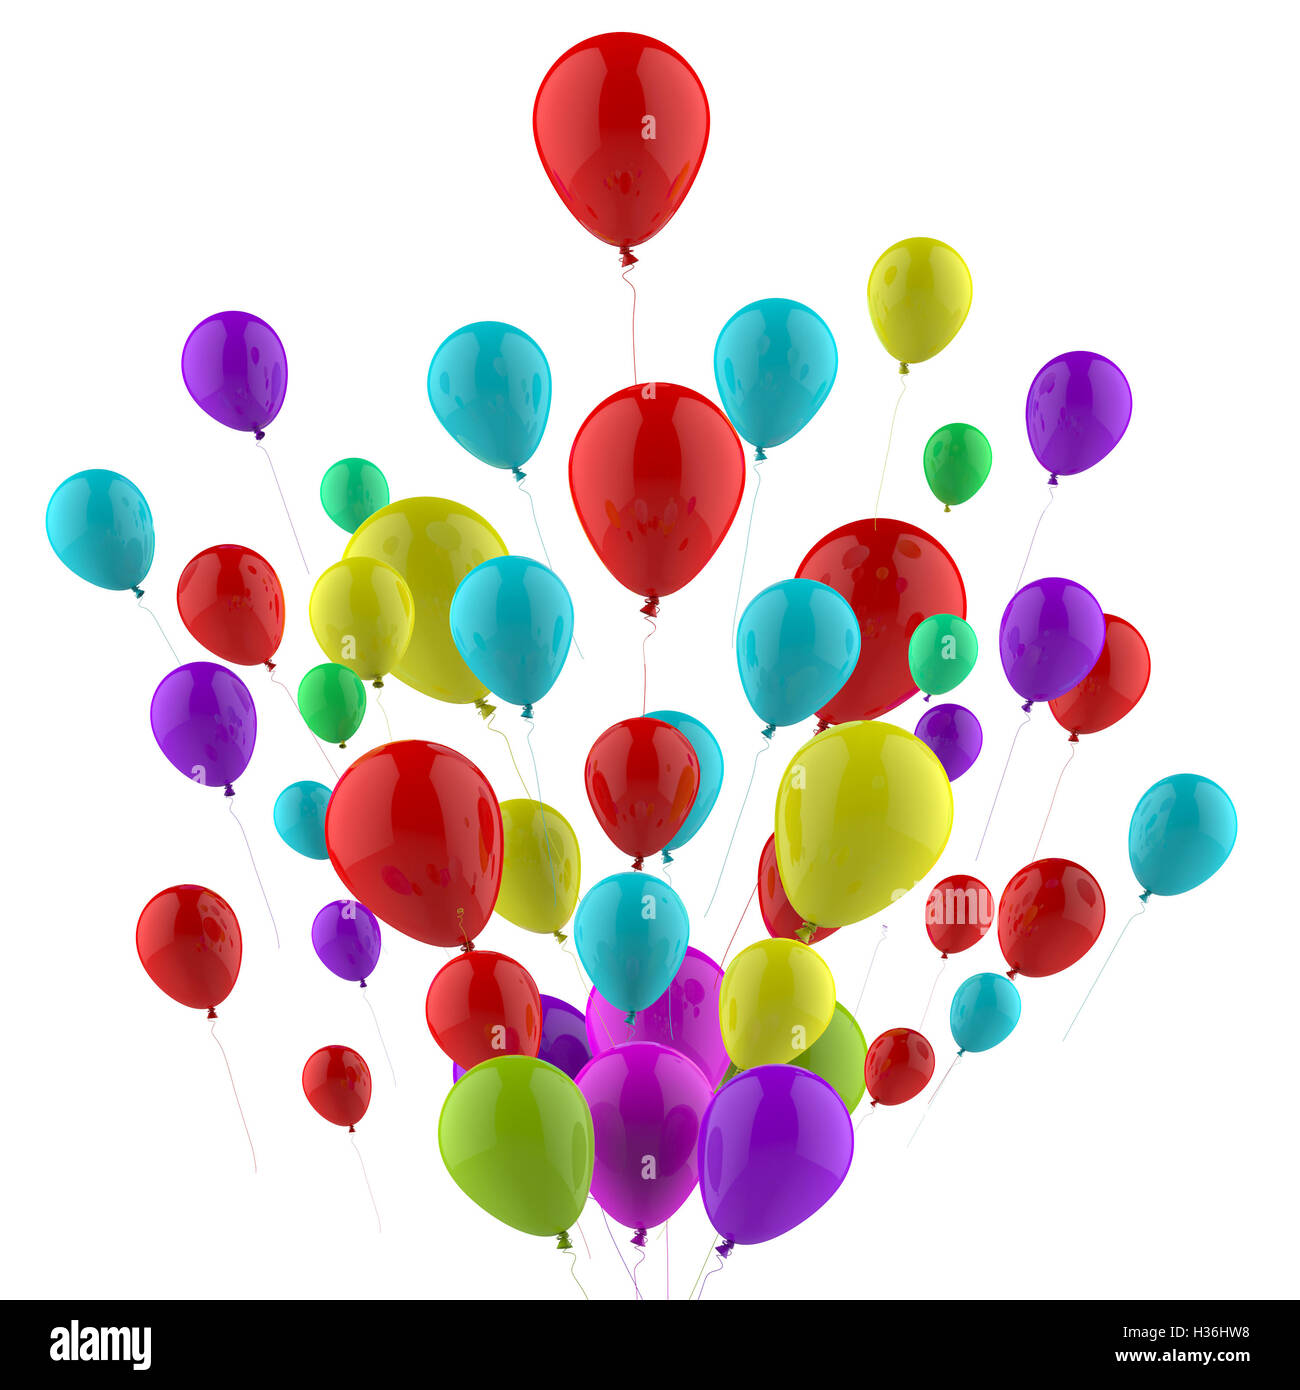 Floating Colourful Balloons Mean Carnival Joy Or Happiness Stock Photo